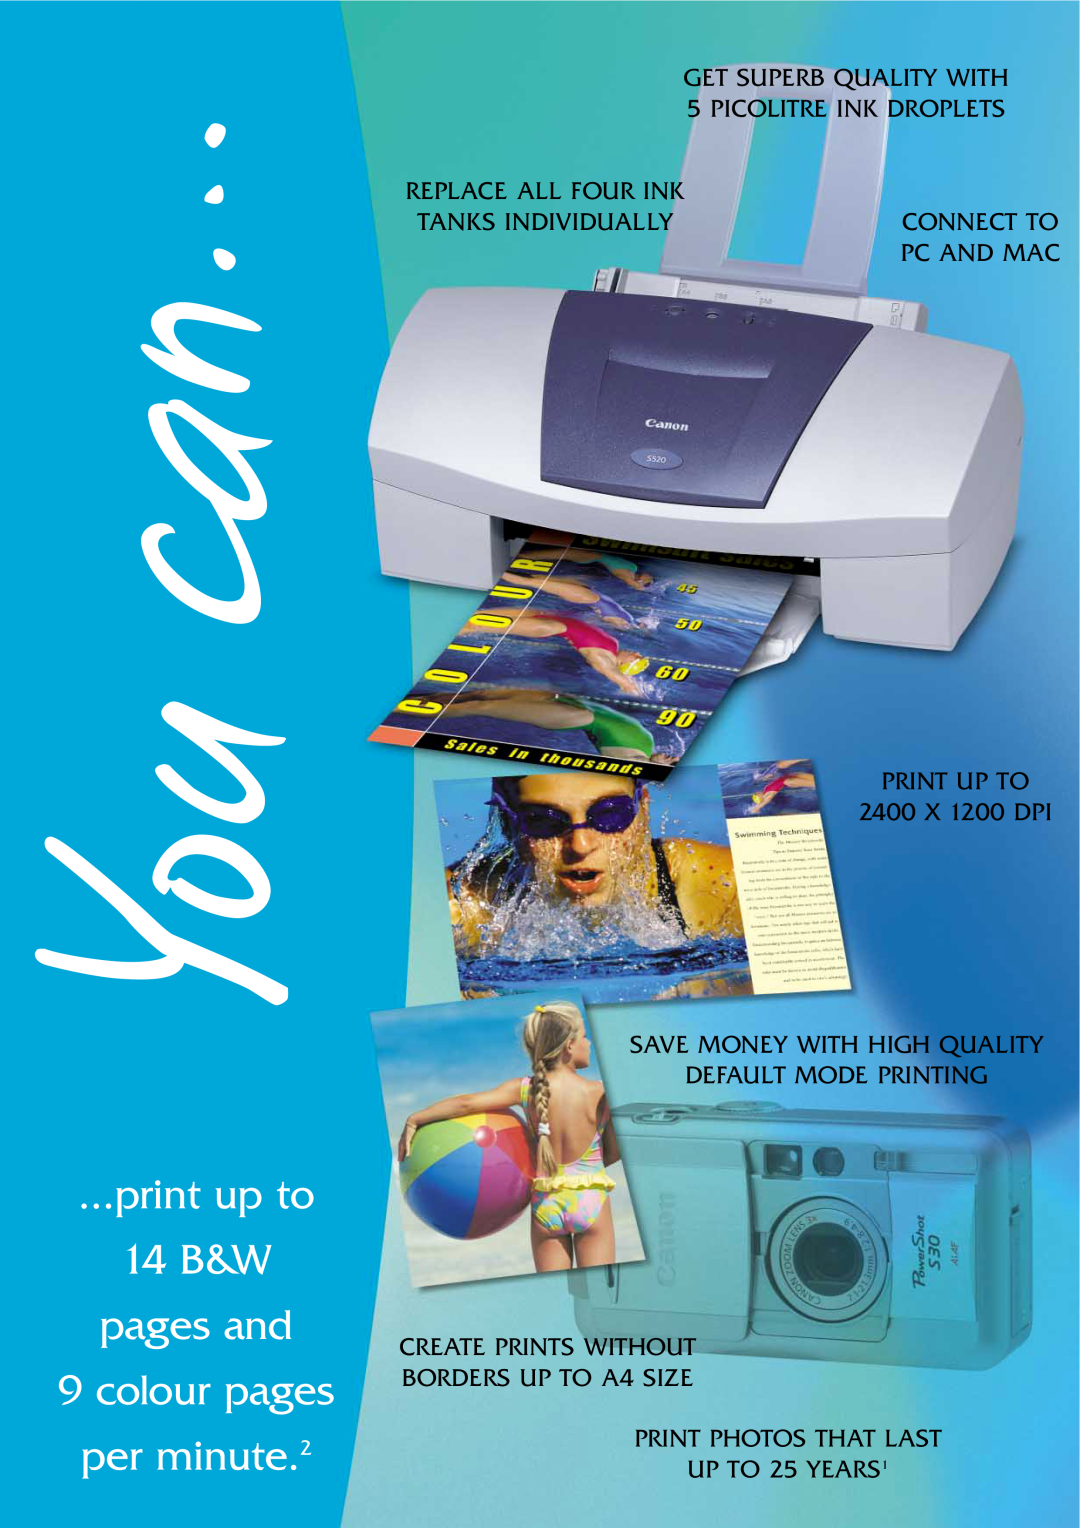 Canon 520 manual print up to 14 B&W pages and 9 colour pages per minute.2, PRINT PHOTOS THAT LAST UP TO 25 YEARS1 